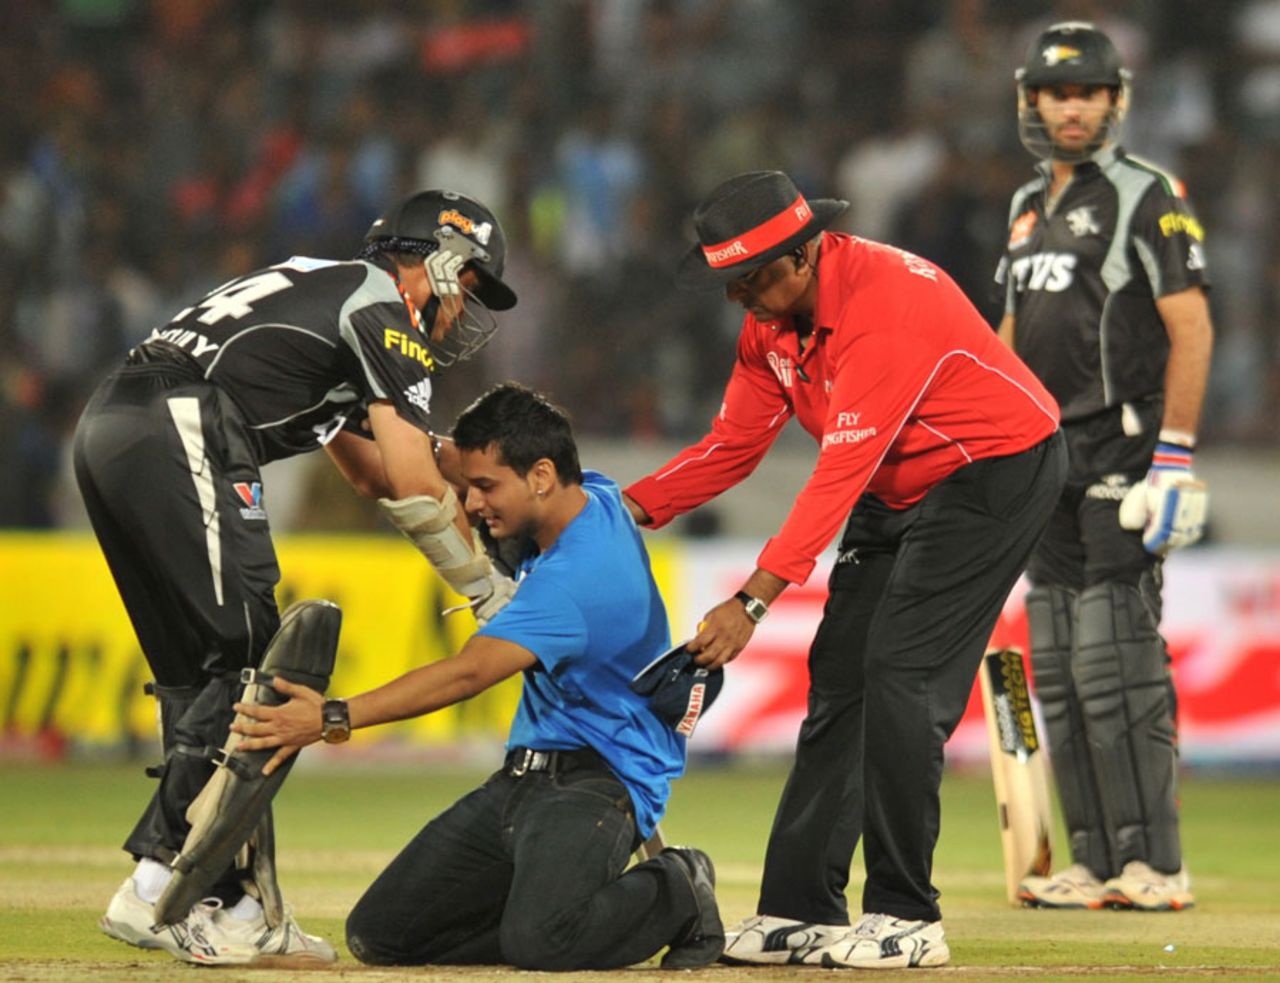 An emotional fan runs into the field to touch Sourav Ganguly's feet during his comeback innings, Deccan Chargers v Pune Warriors, IPL 2011, Hyderabad, April 10, 2011